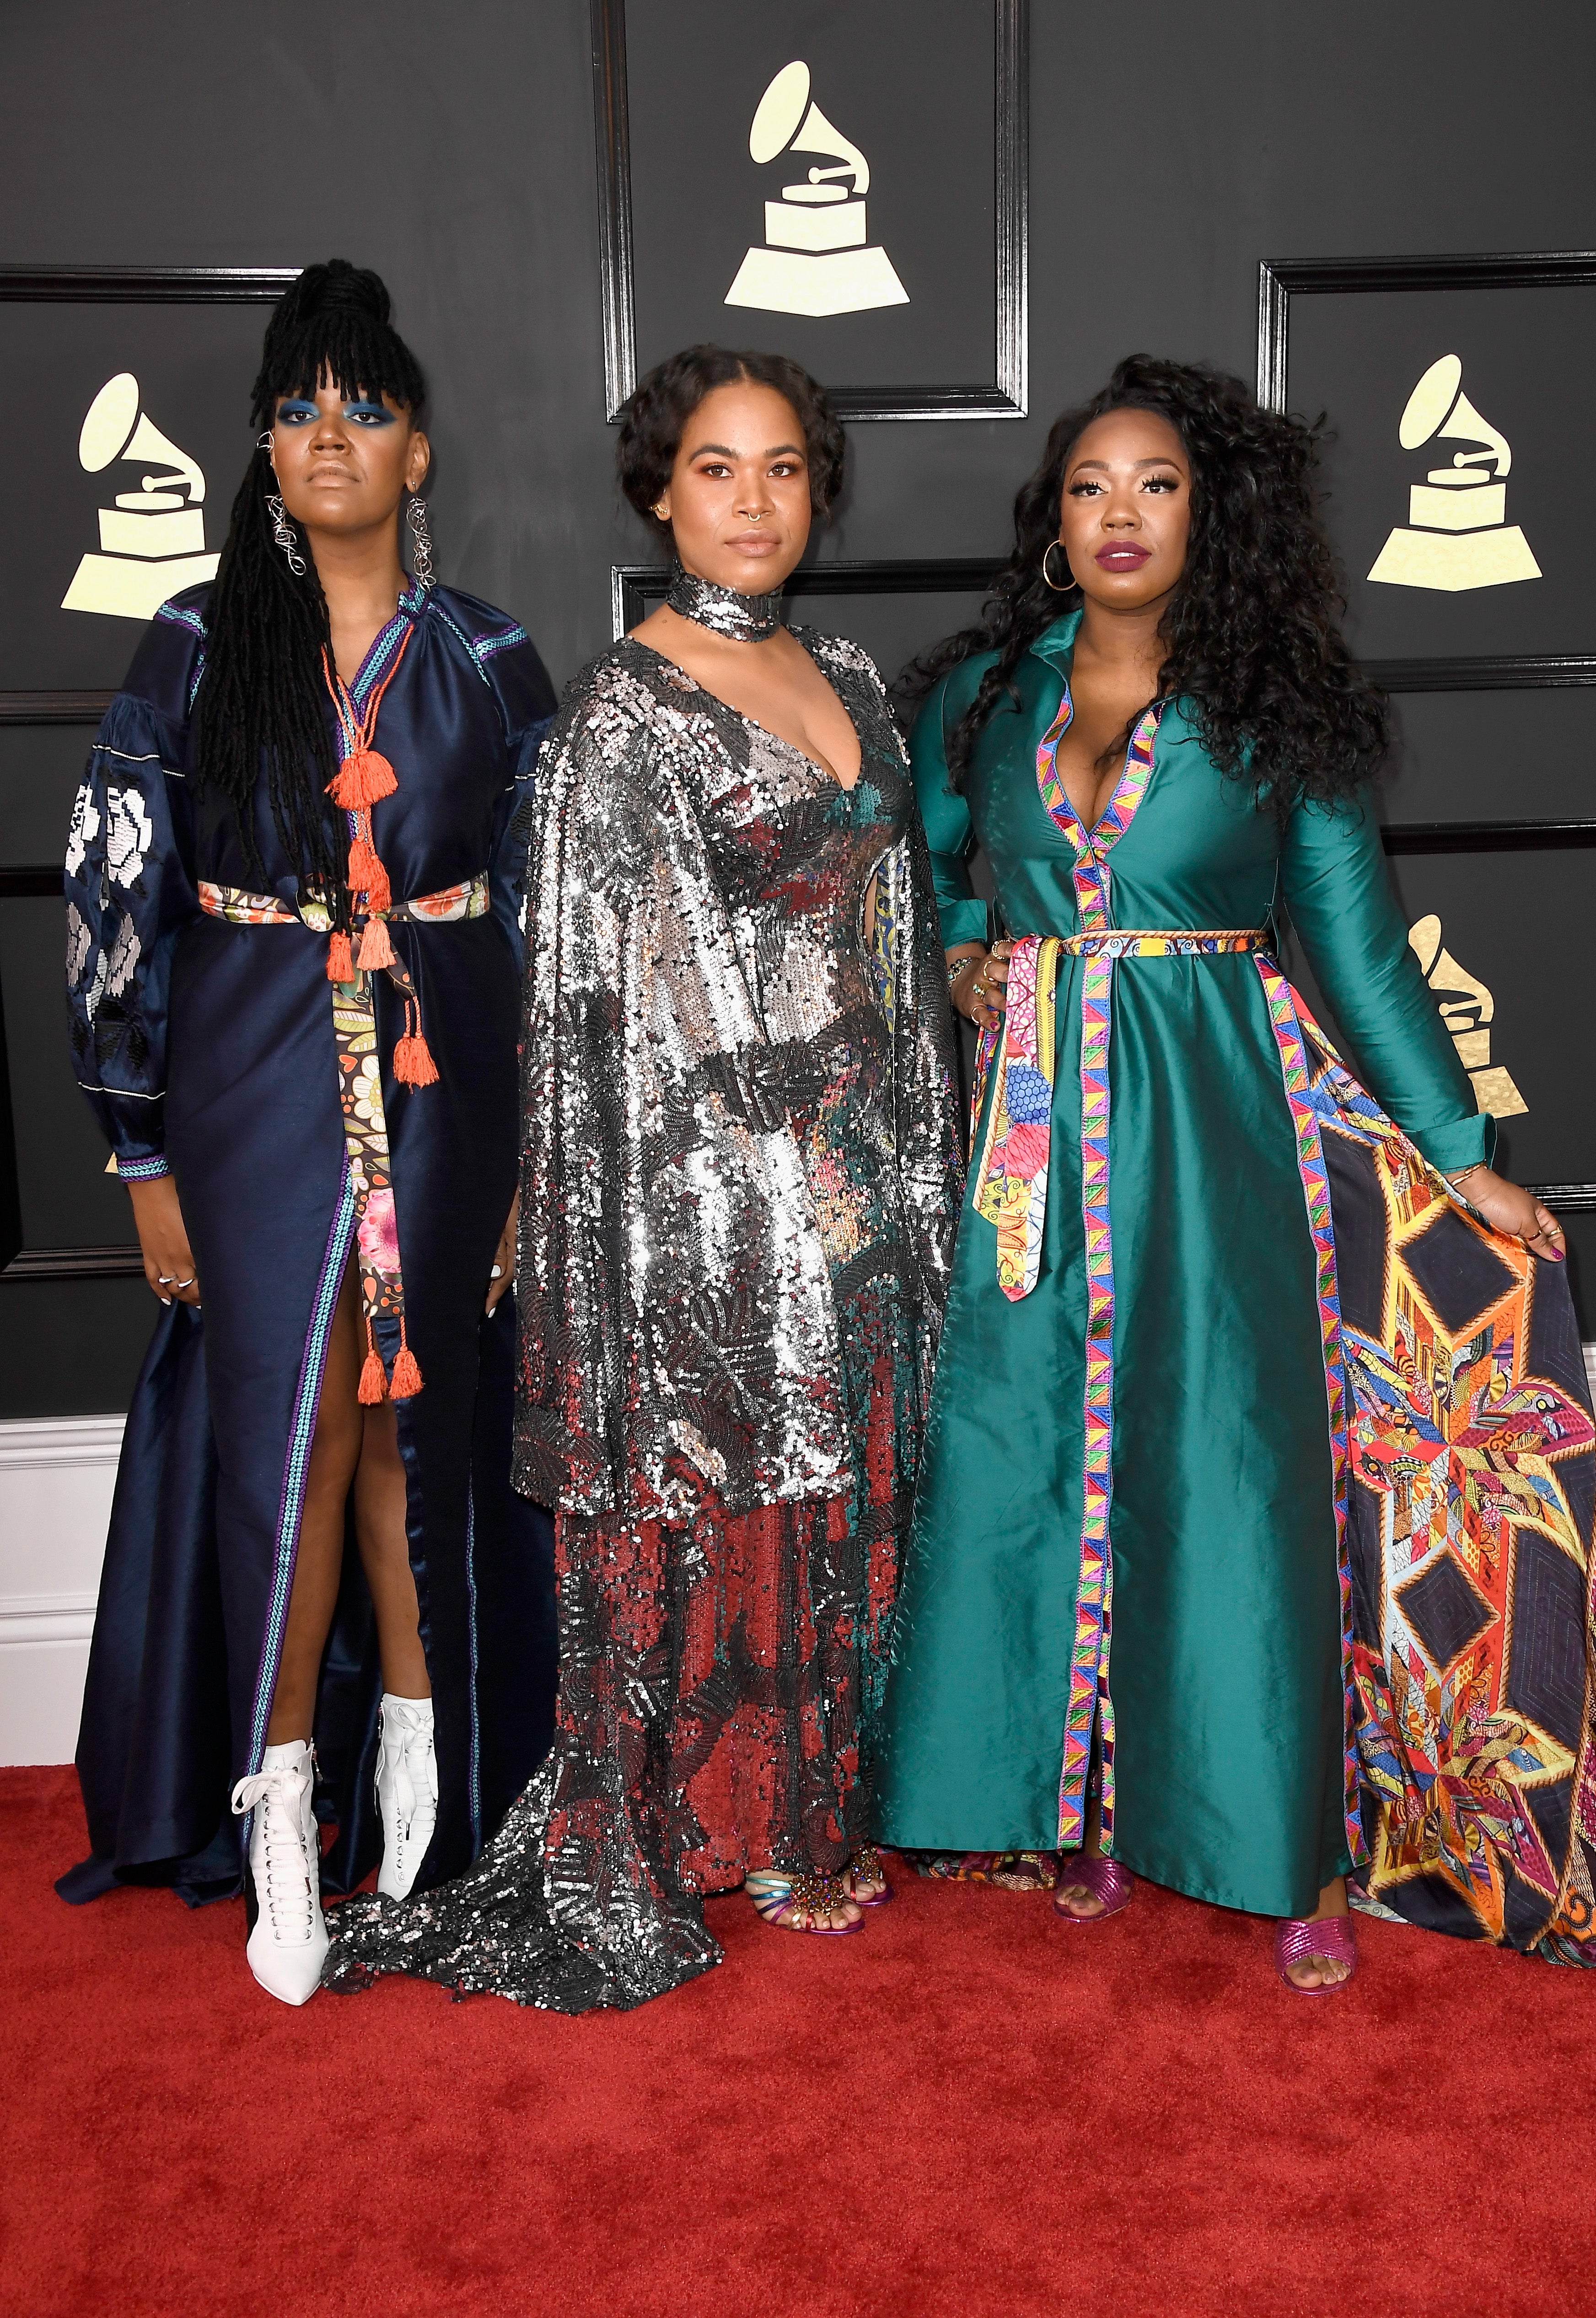 The 2017 Grammy Awards Red Carpet Was on Another Level of Fabulous
